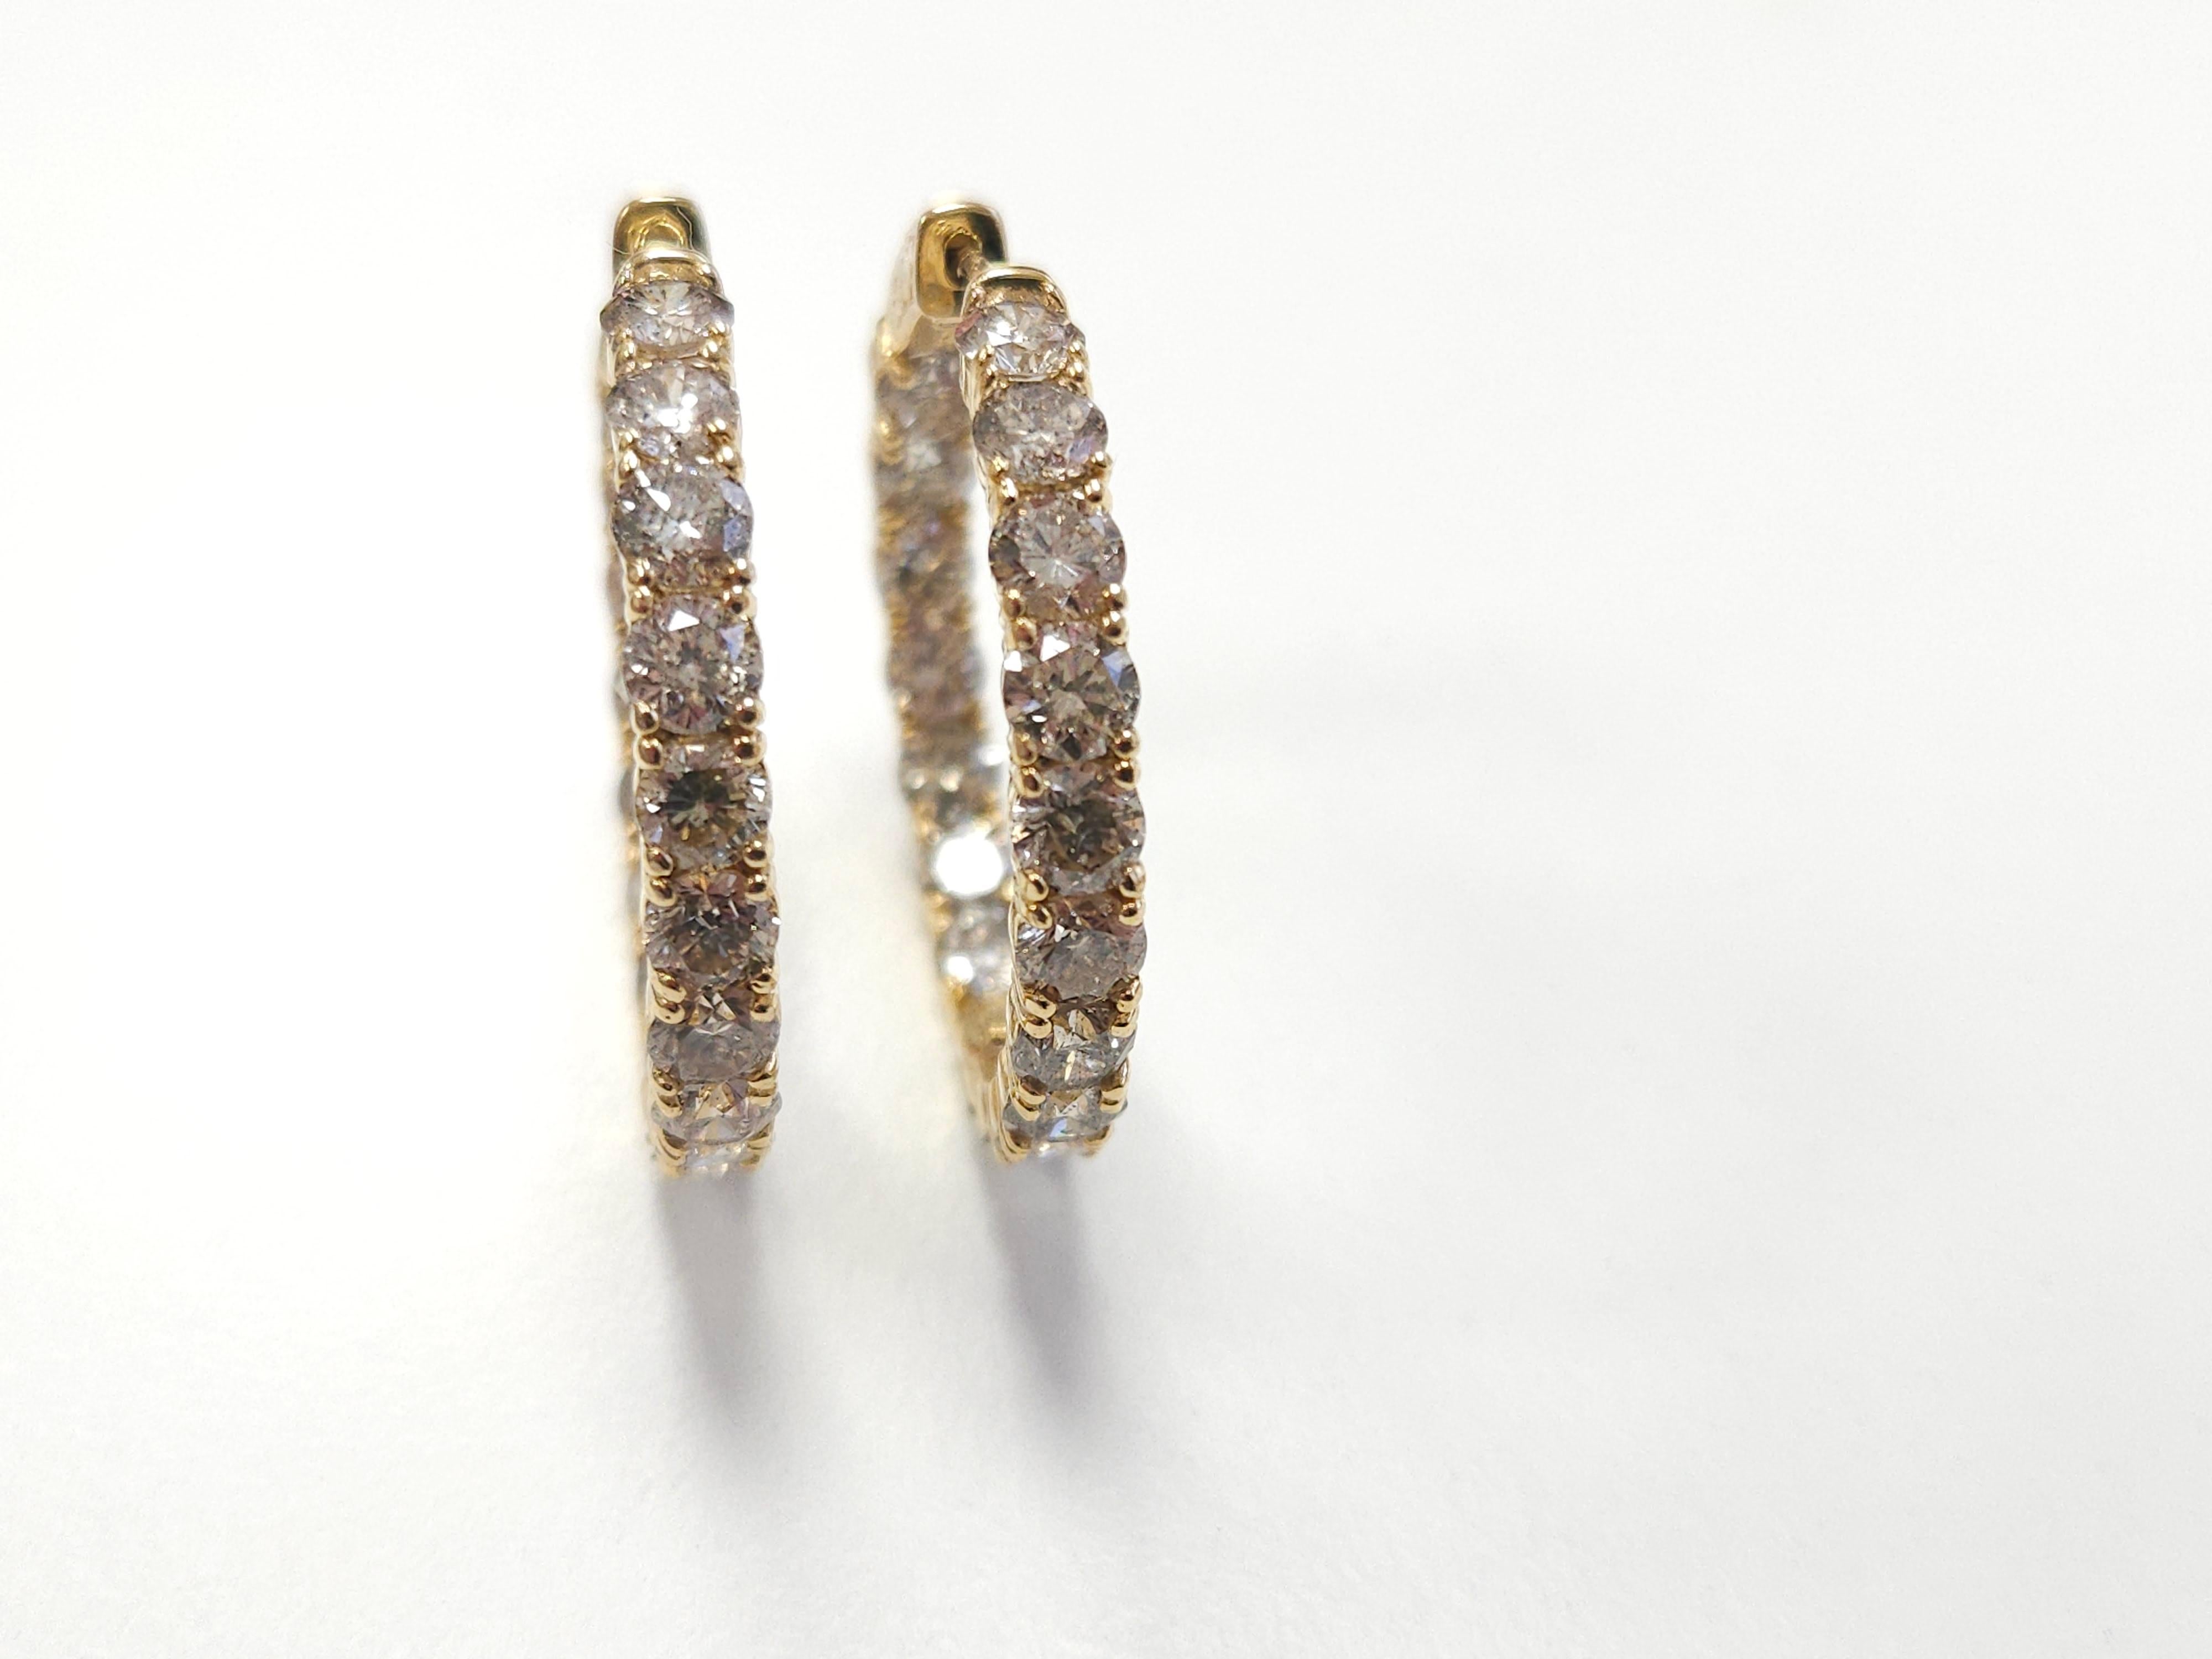 7.82 Carat Diamond Huggie Hoops Earrings 14 Karat Yellow Gold In New Condition For Sale In Great Neck, NY